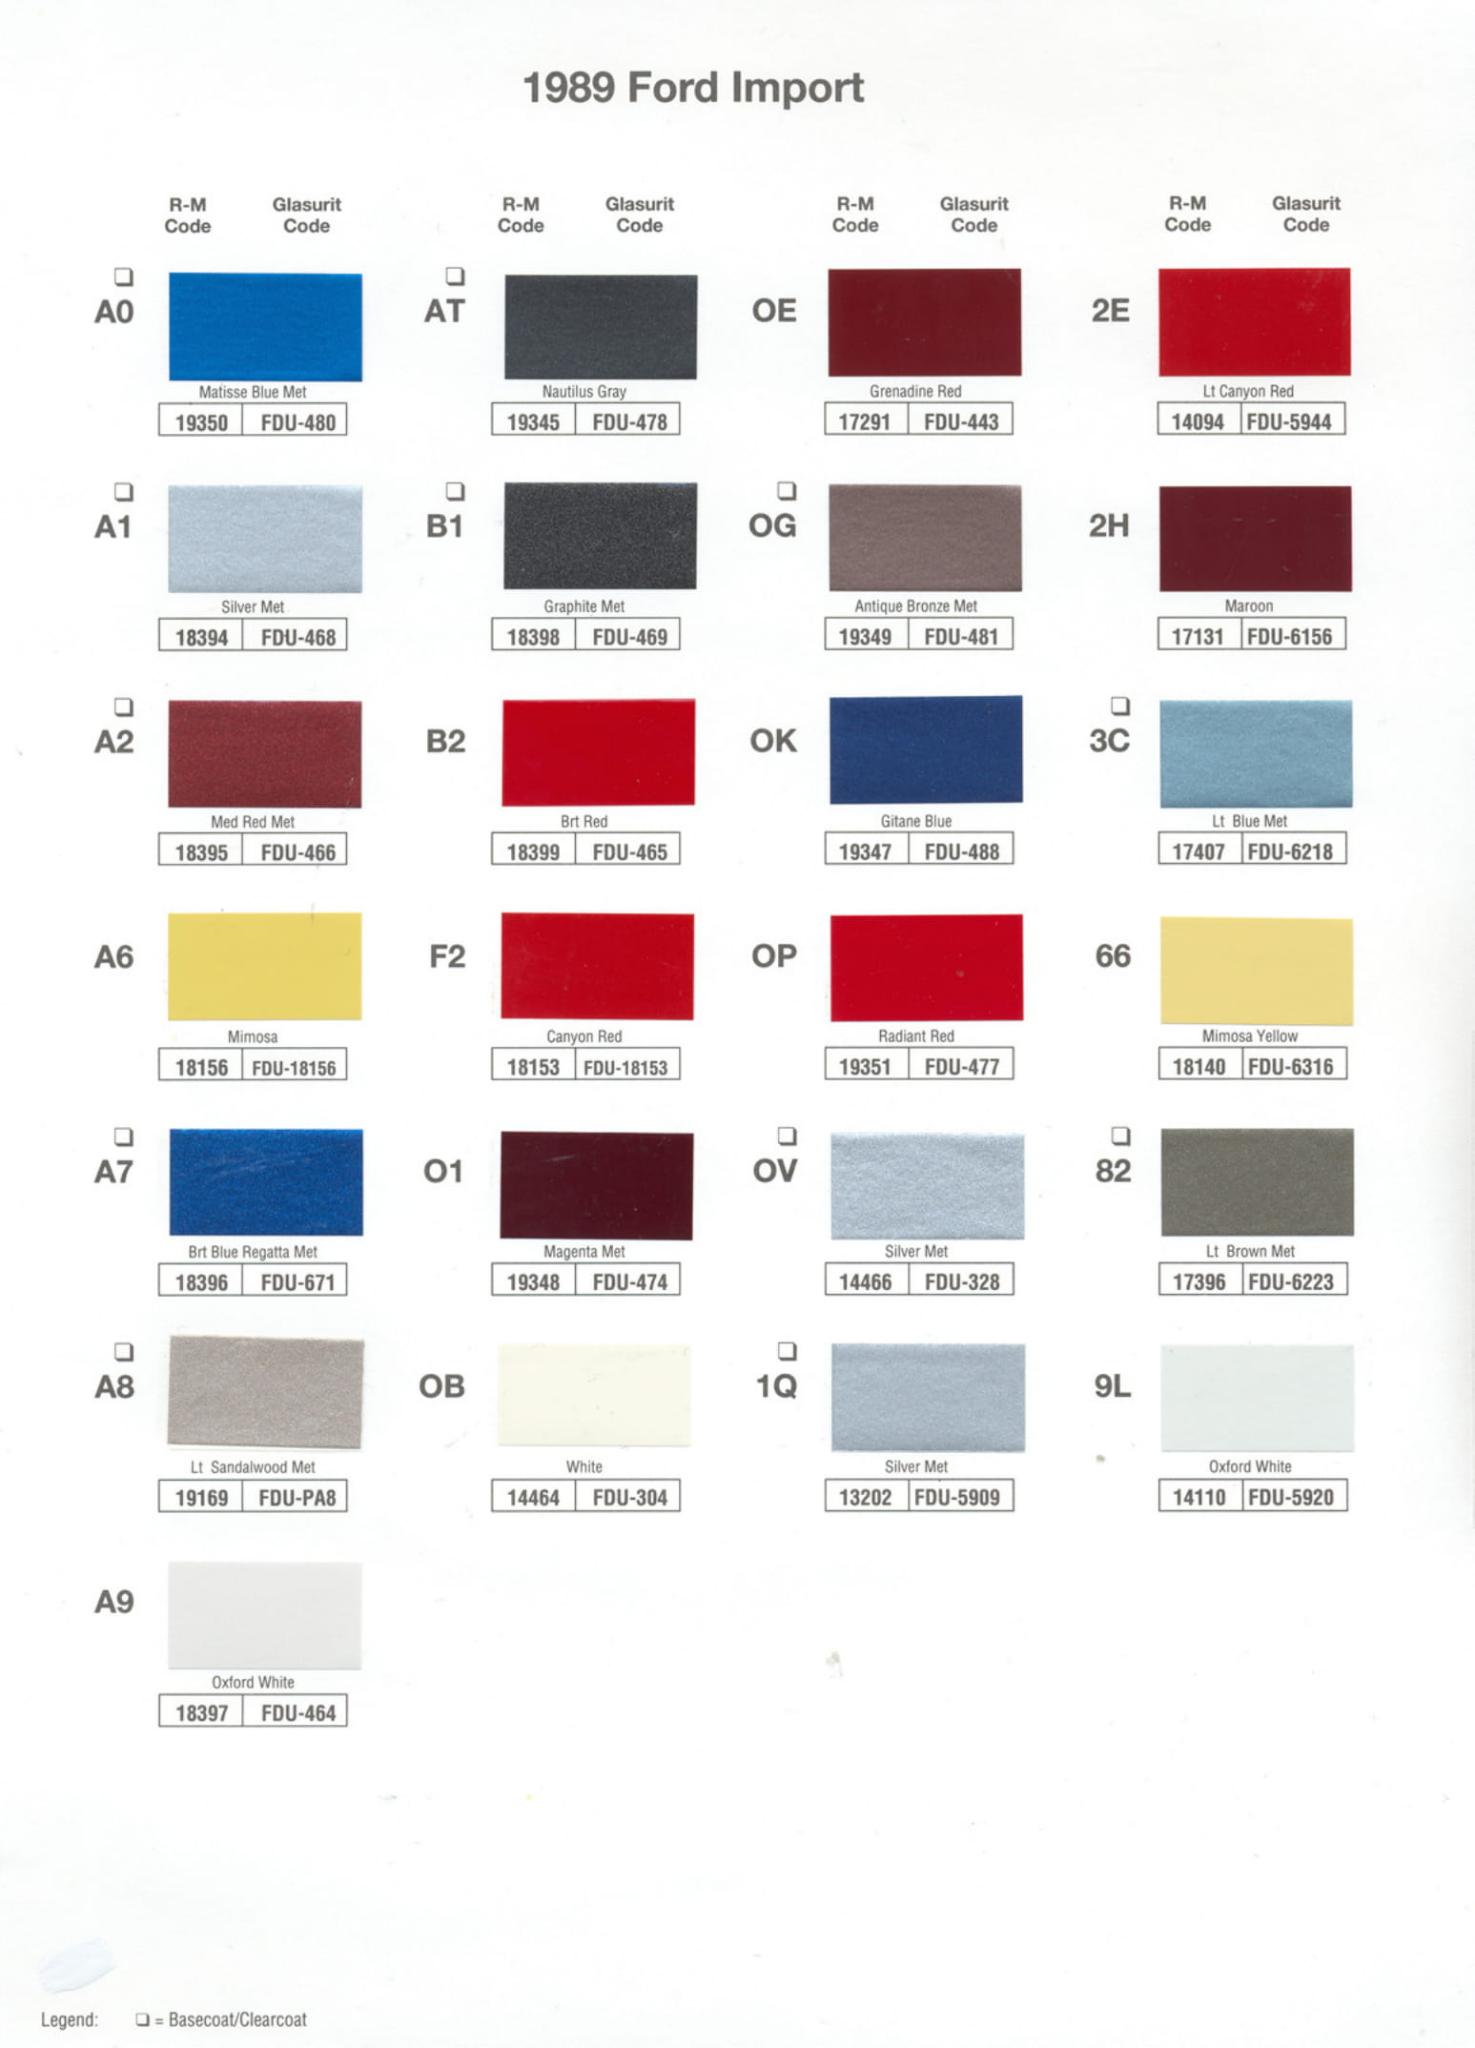 paint color examples, their ordering codes, and mixing stock numbers for Ford, Lincoln & Mercury Vehicles